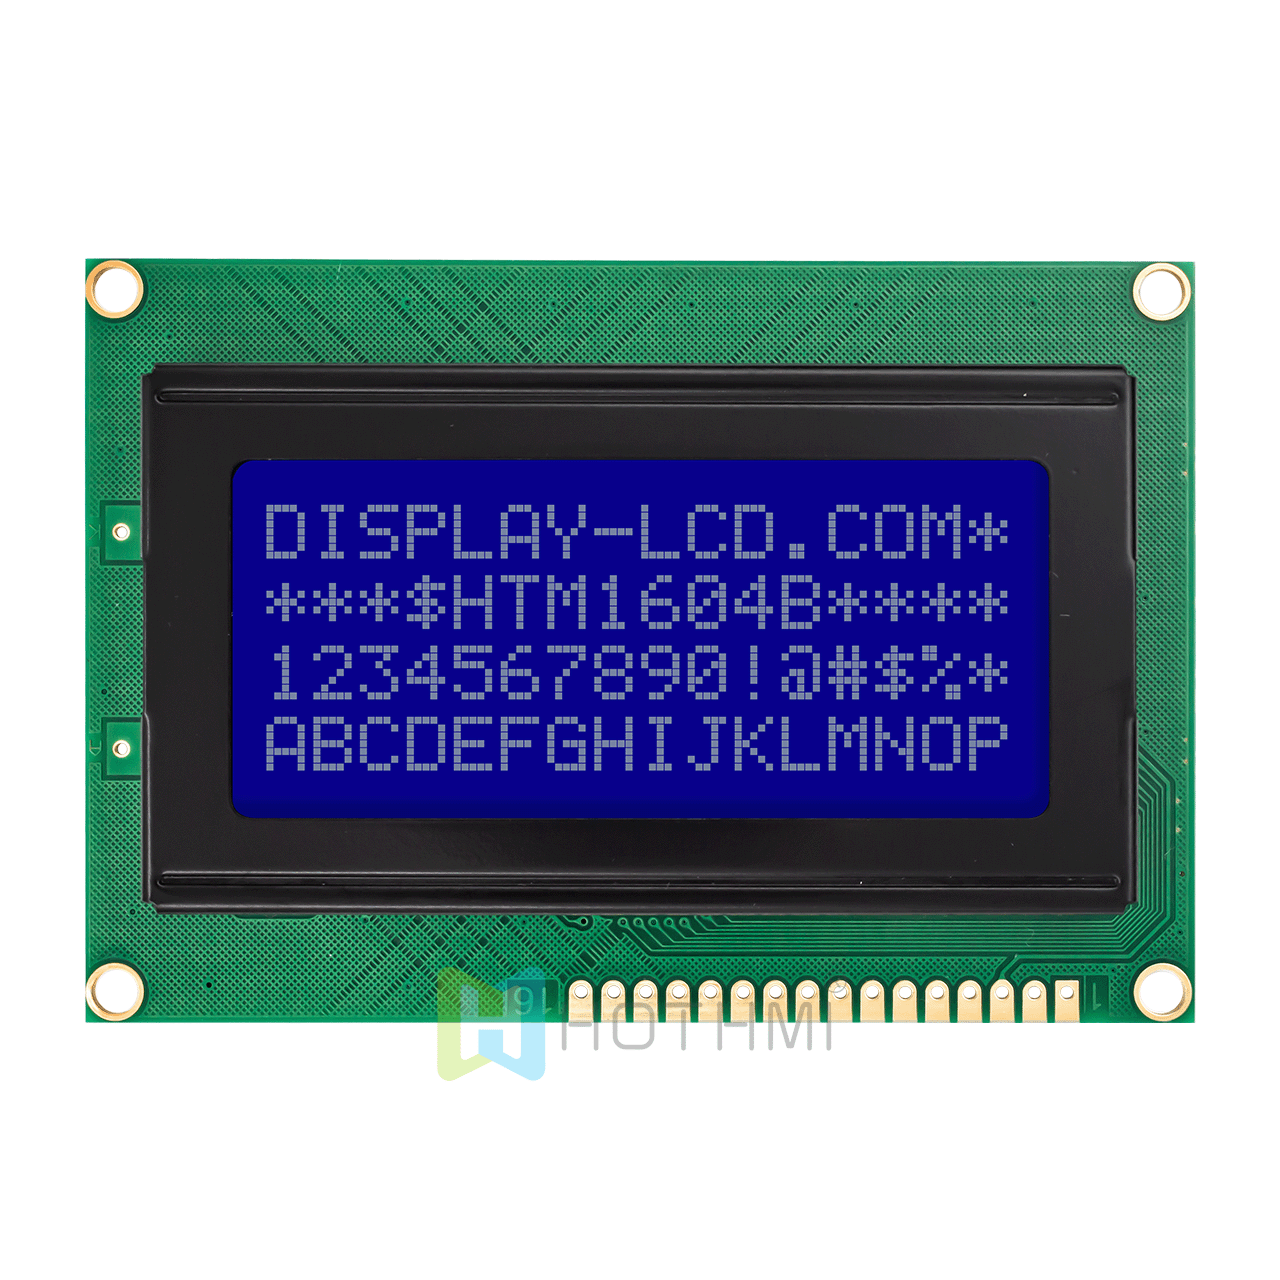 4x16 character LCD Module | STN(-) white side backlit monochrome display | Arduino | MCU interface | ST7066U controller | Total transflective | White text on blue background